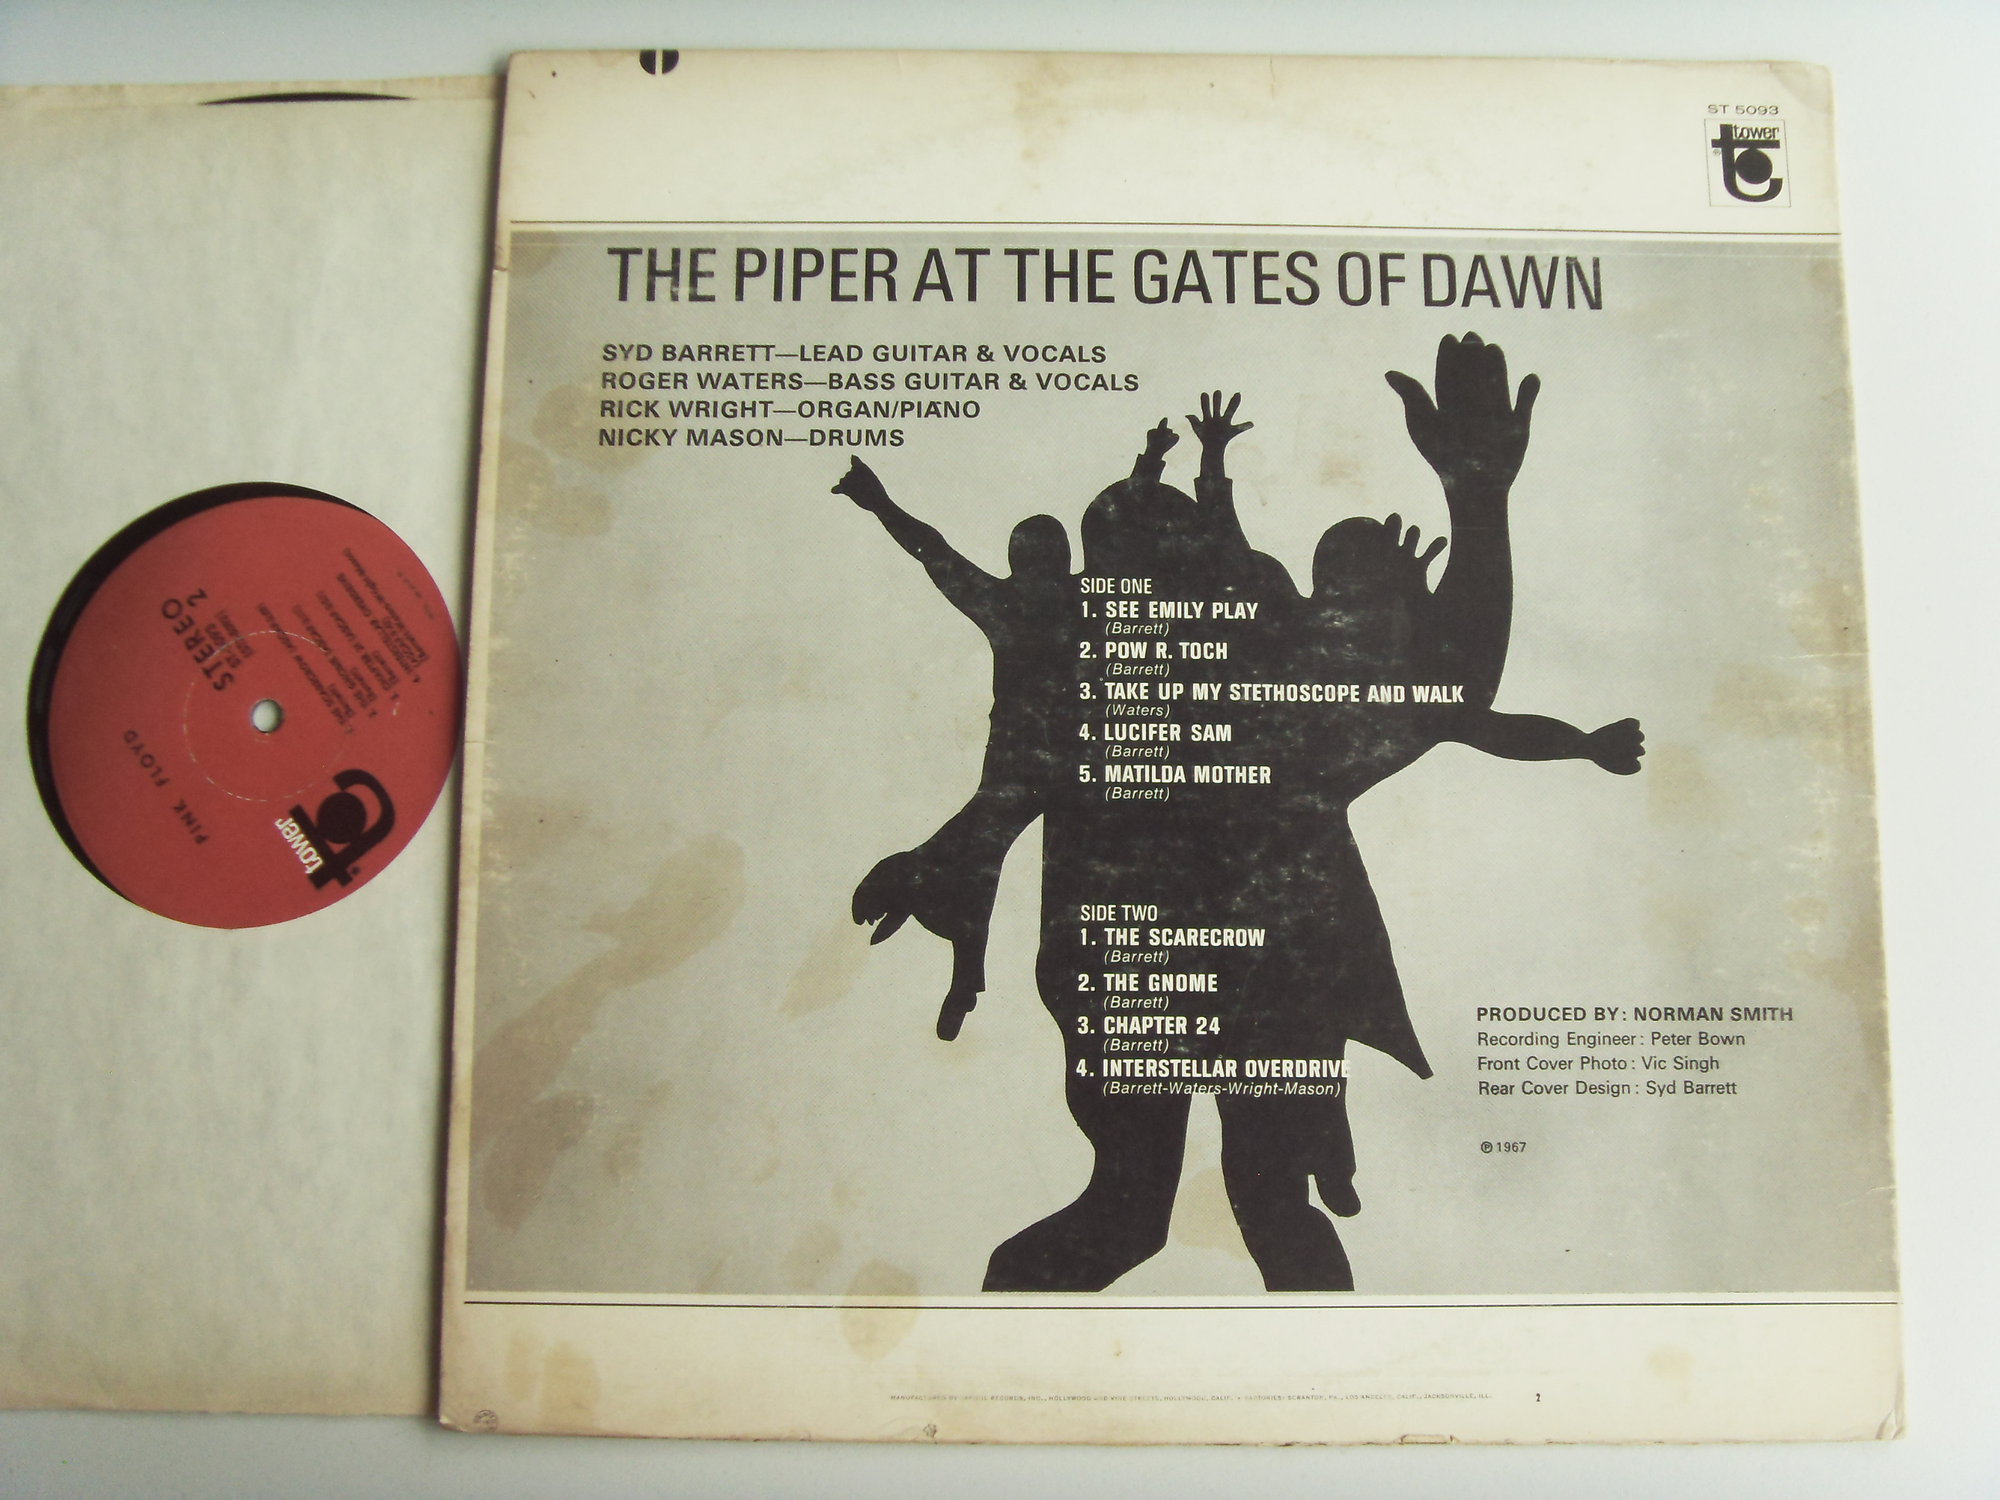 PINK FLOYD The piper at the gates of dawn 2